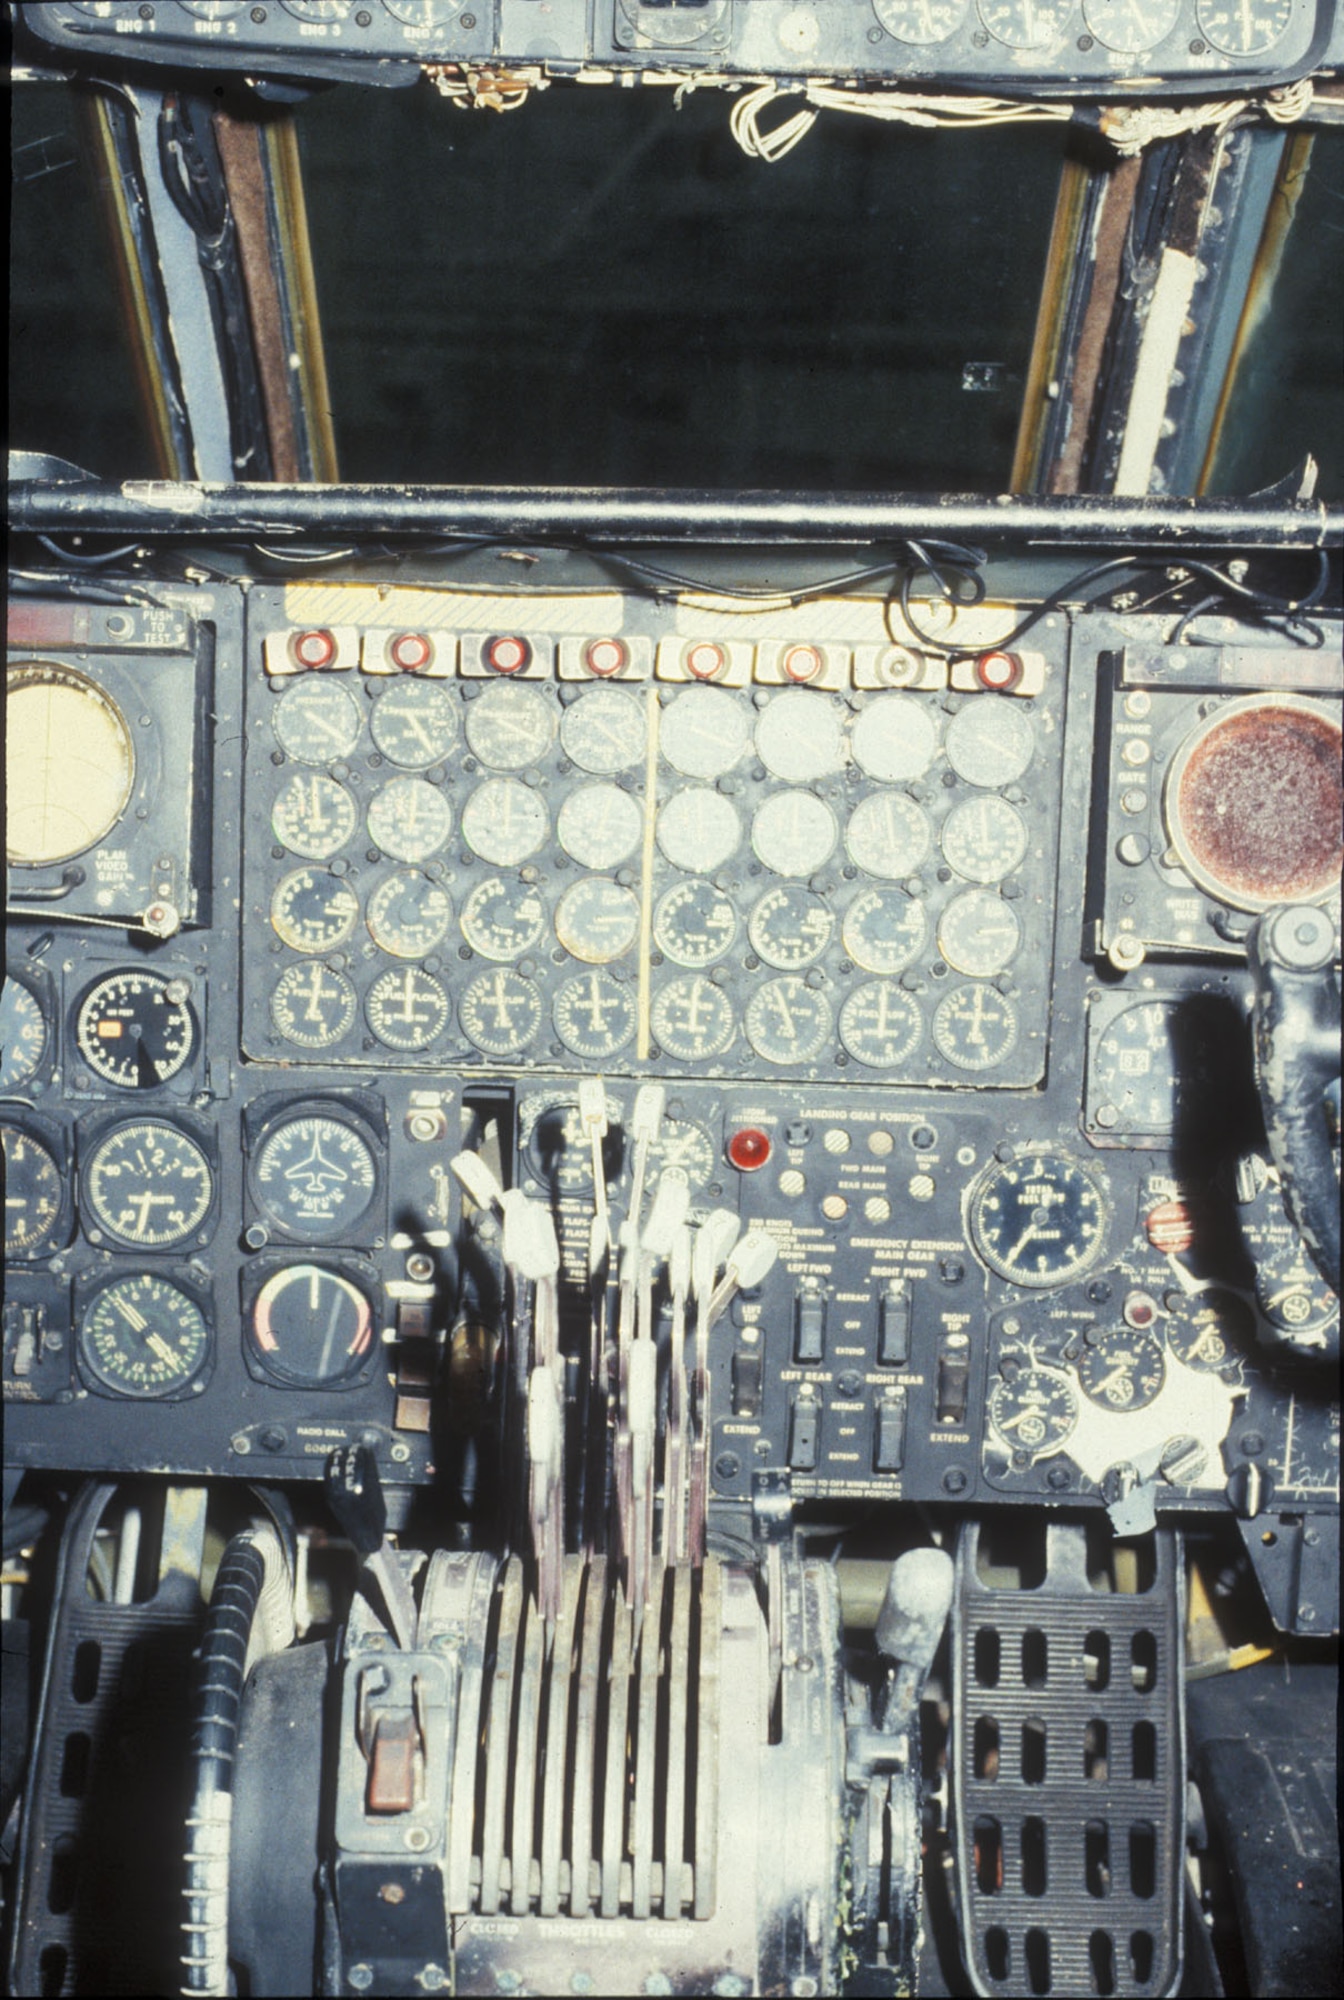 DAYTON, Ohio - Boeing B-52D Stratofortress cockpit at the National Museum of the U.S. Air Force. (U.S. Air Force photo)